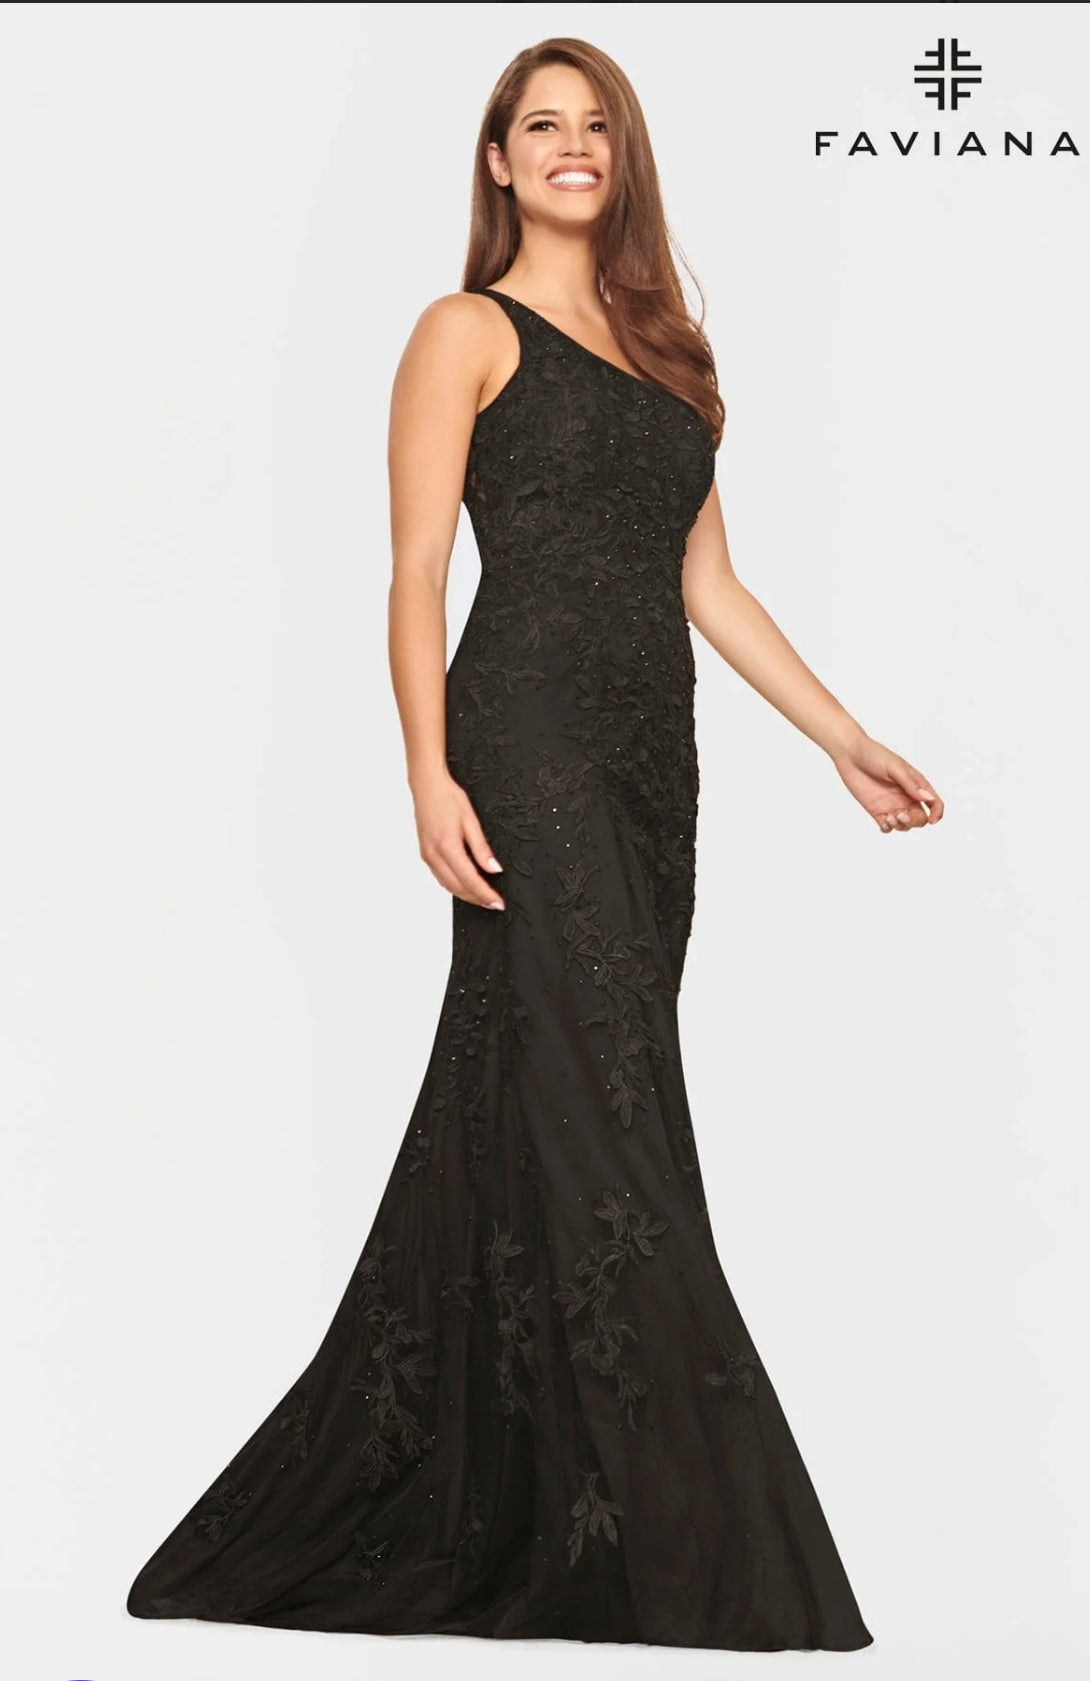 Black One Shoulder Lace Dress With Mermaid Skirt FAVIANA S10822